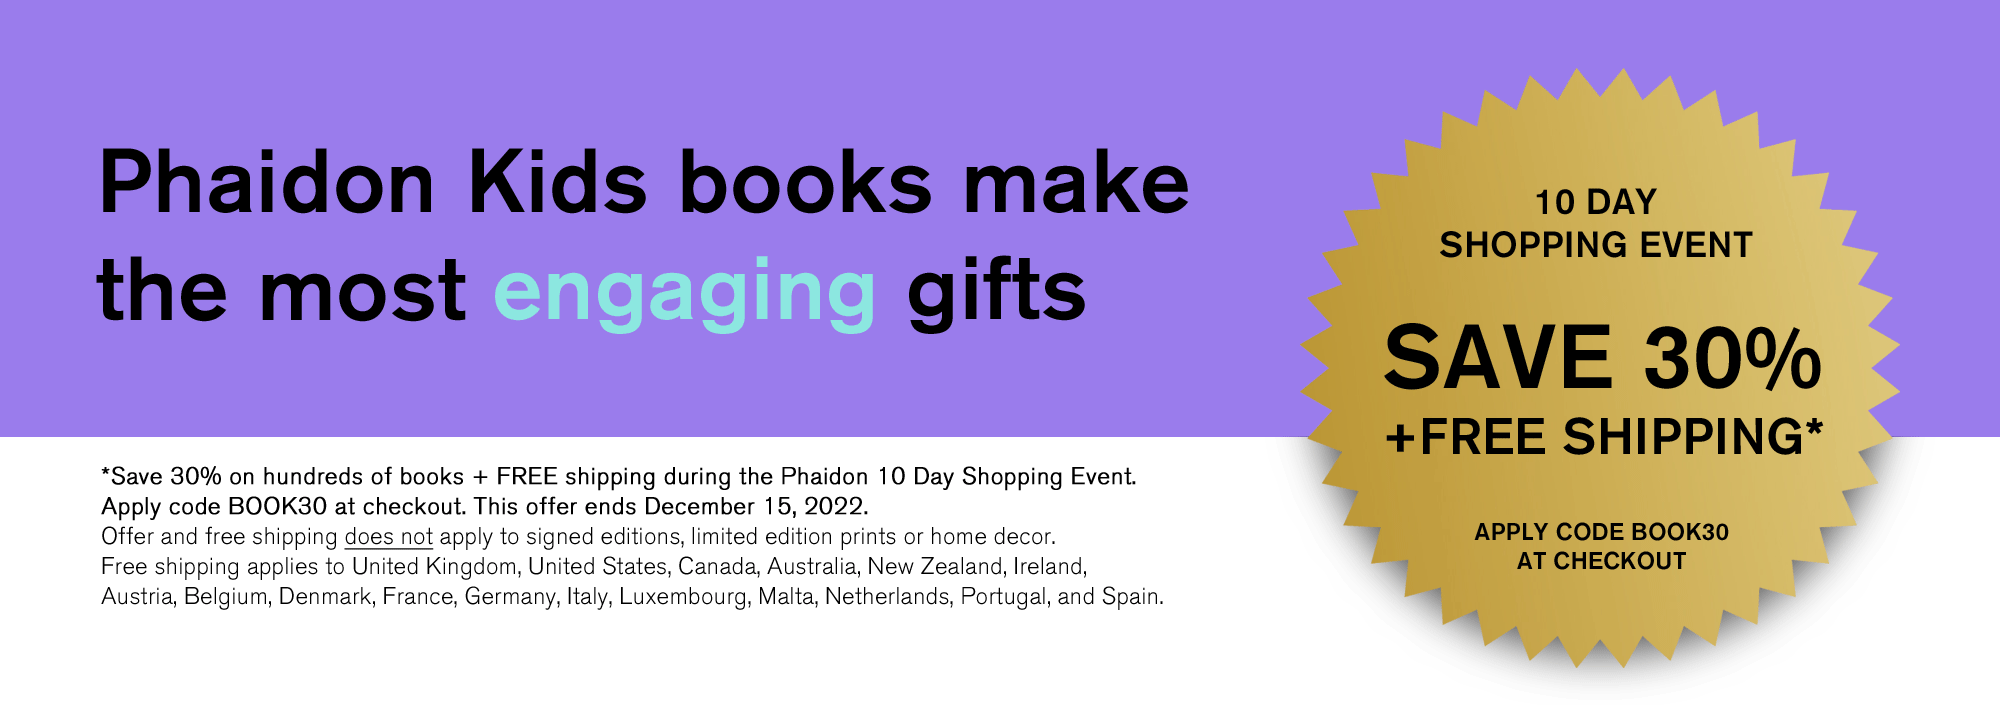 10 Day Shopping Event